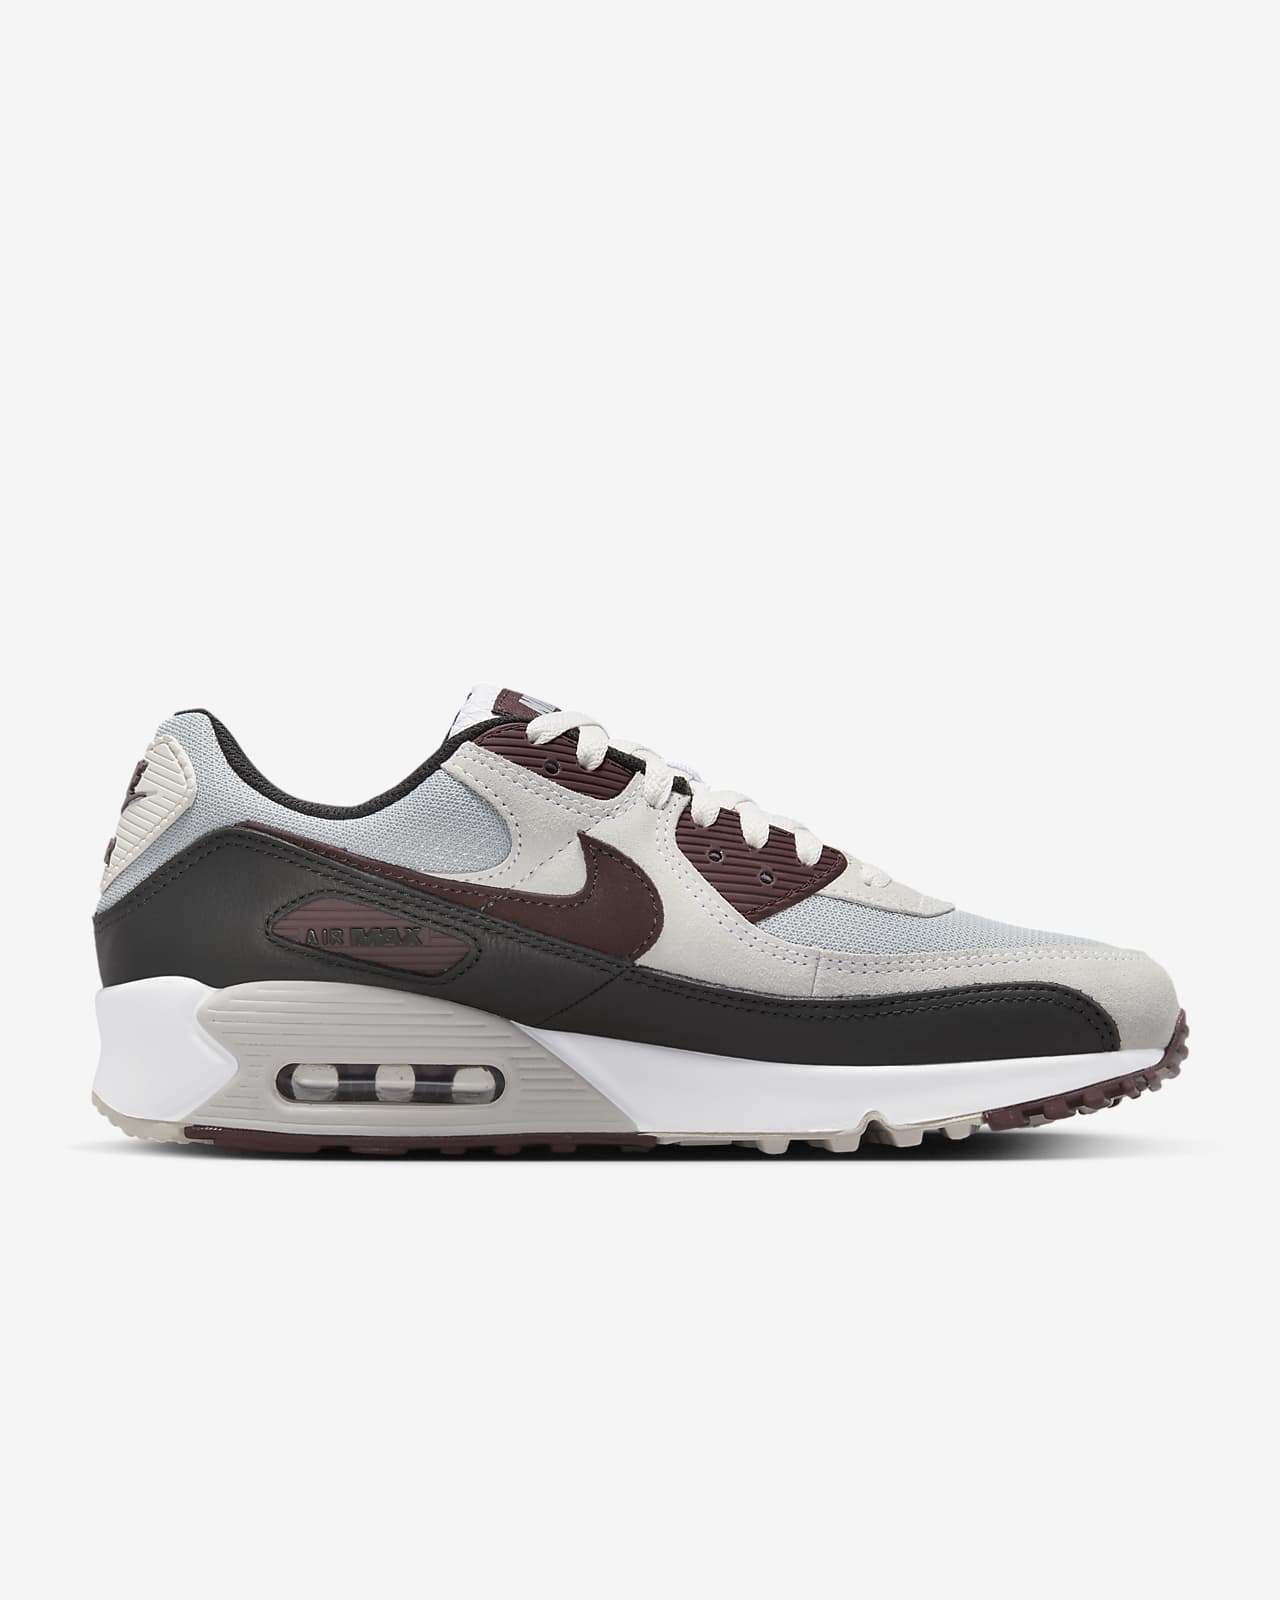 Sports Hold confusion Nike Air Max 90 Men's Shoes. Nike.com